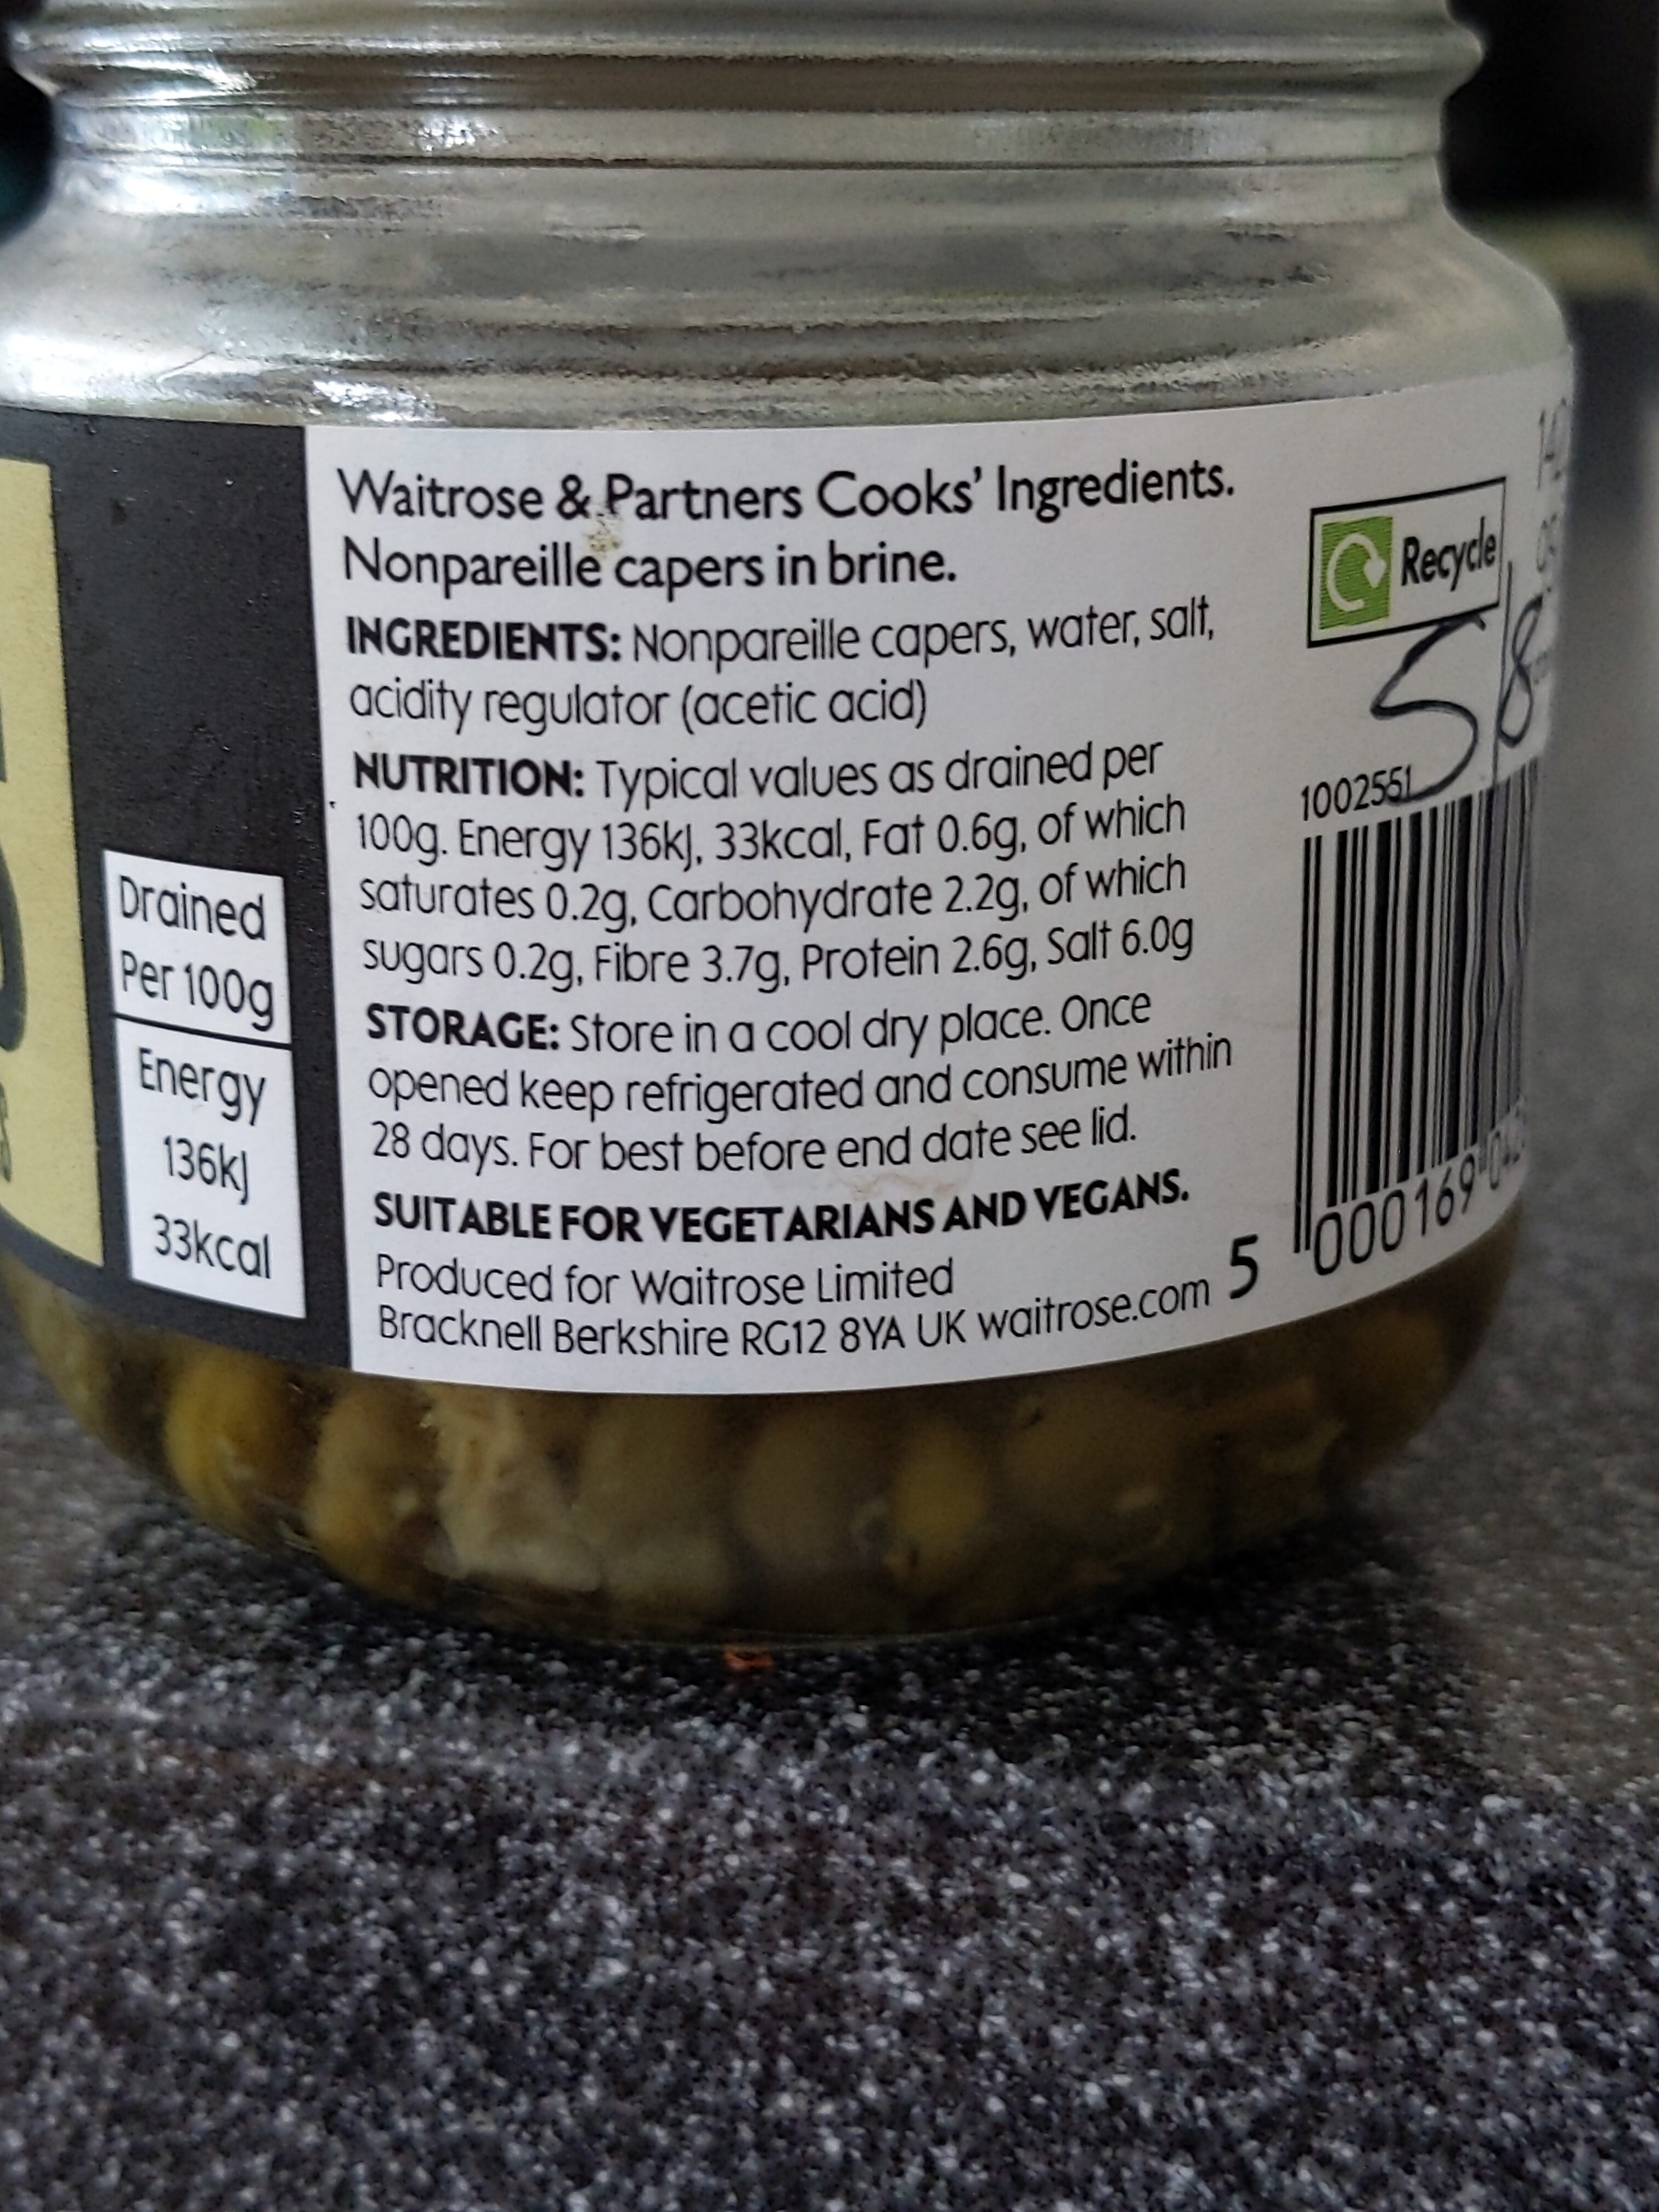 Nonpareille capers - Ingredients